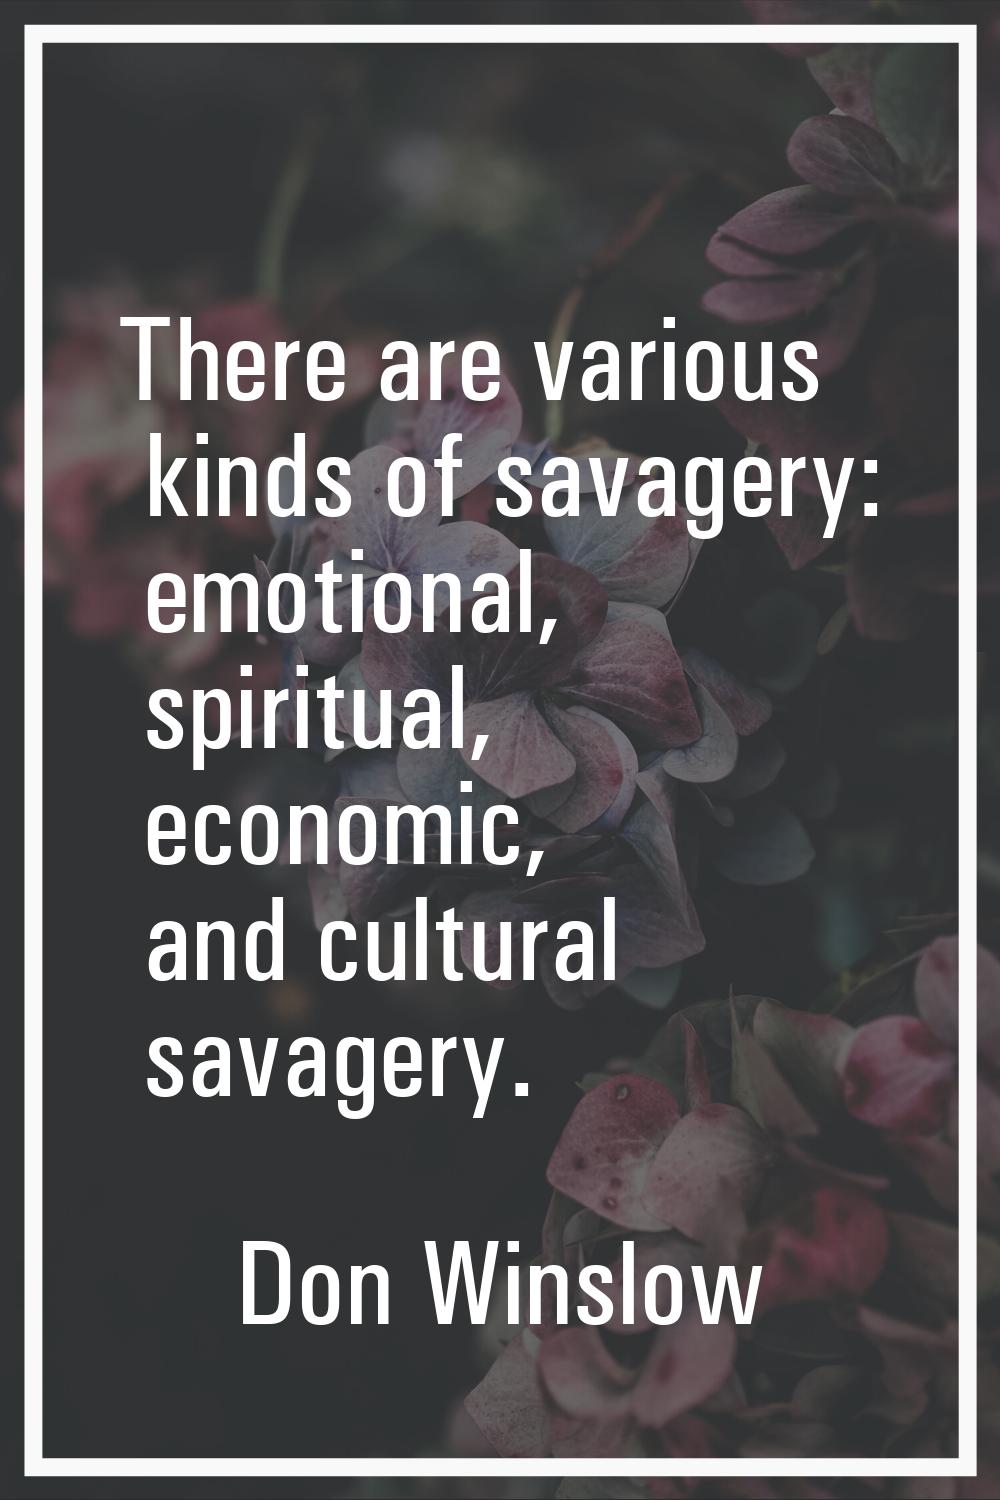 There are various kinds of savagery: emotional, spiritual, economic, and cultural savagery.